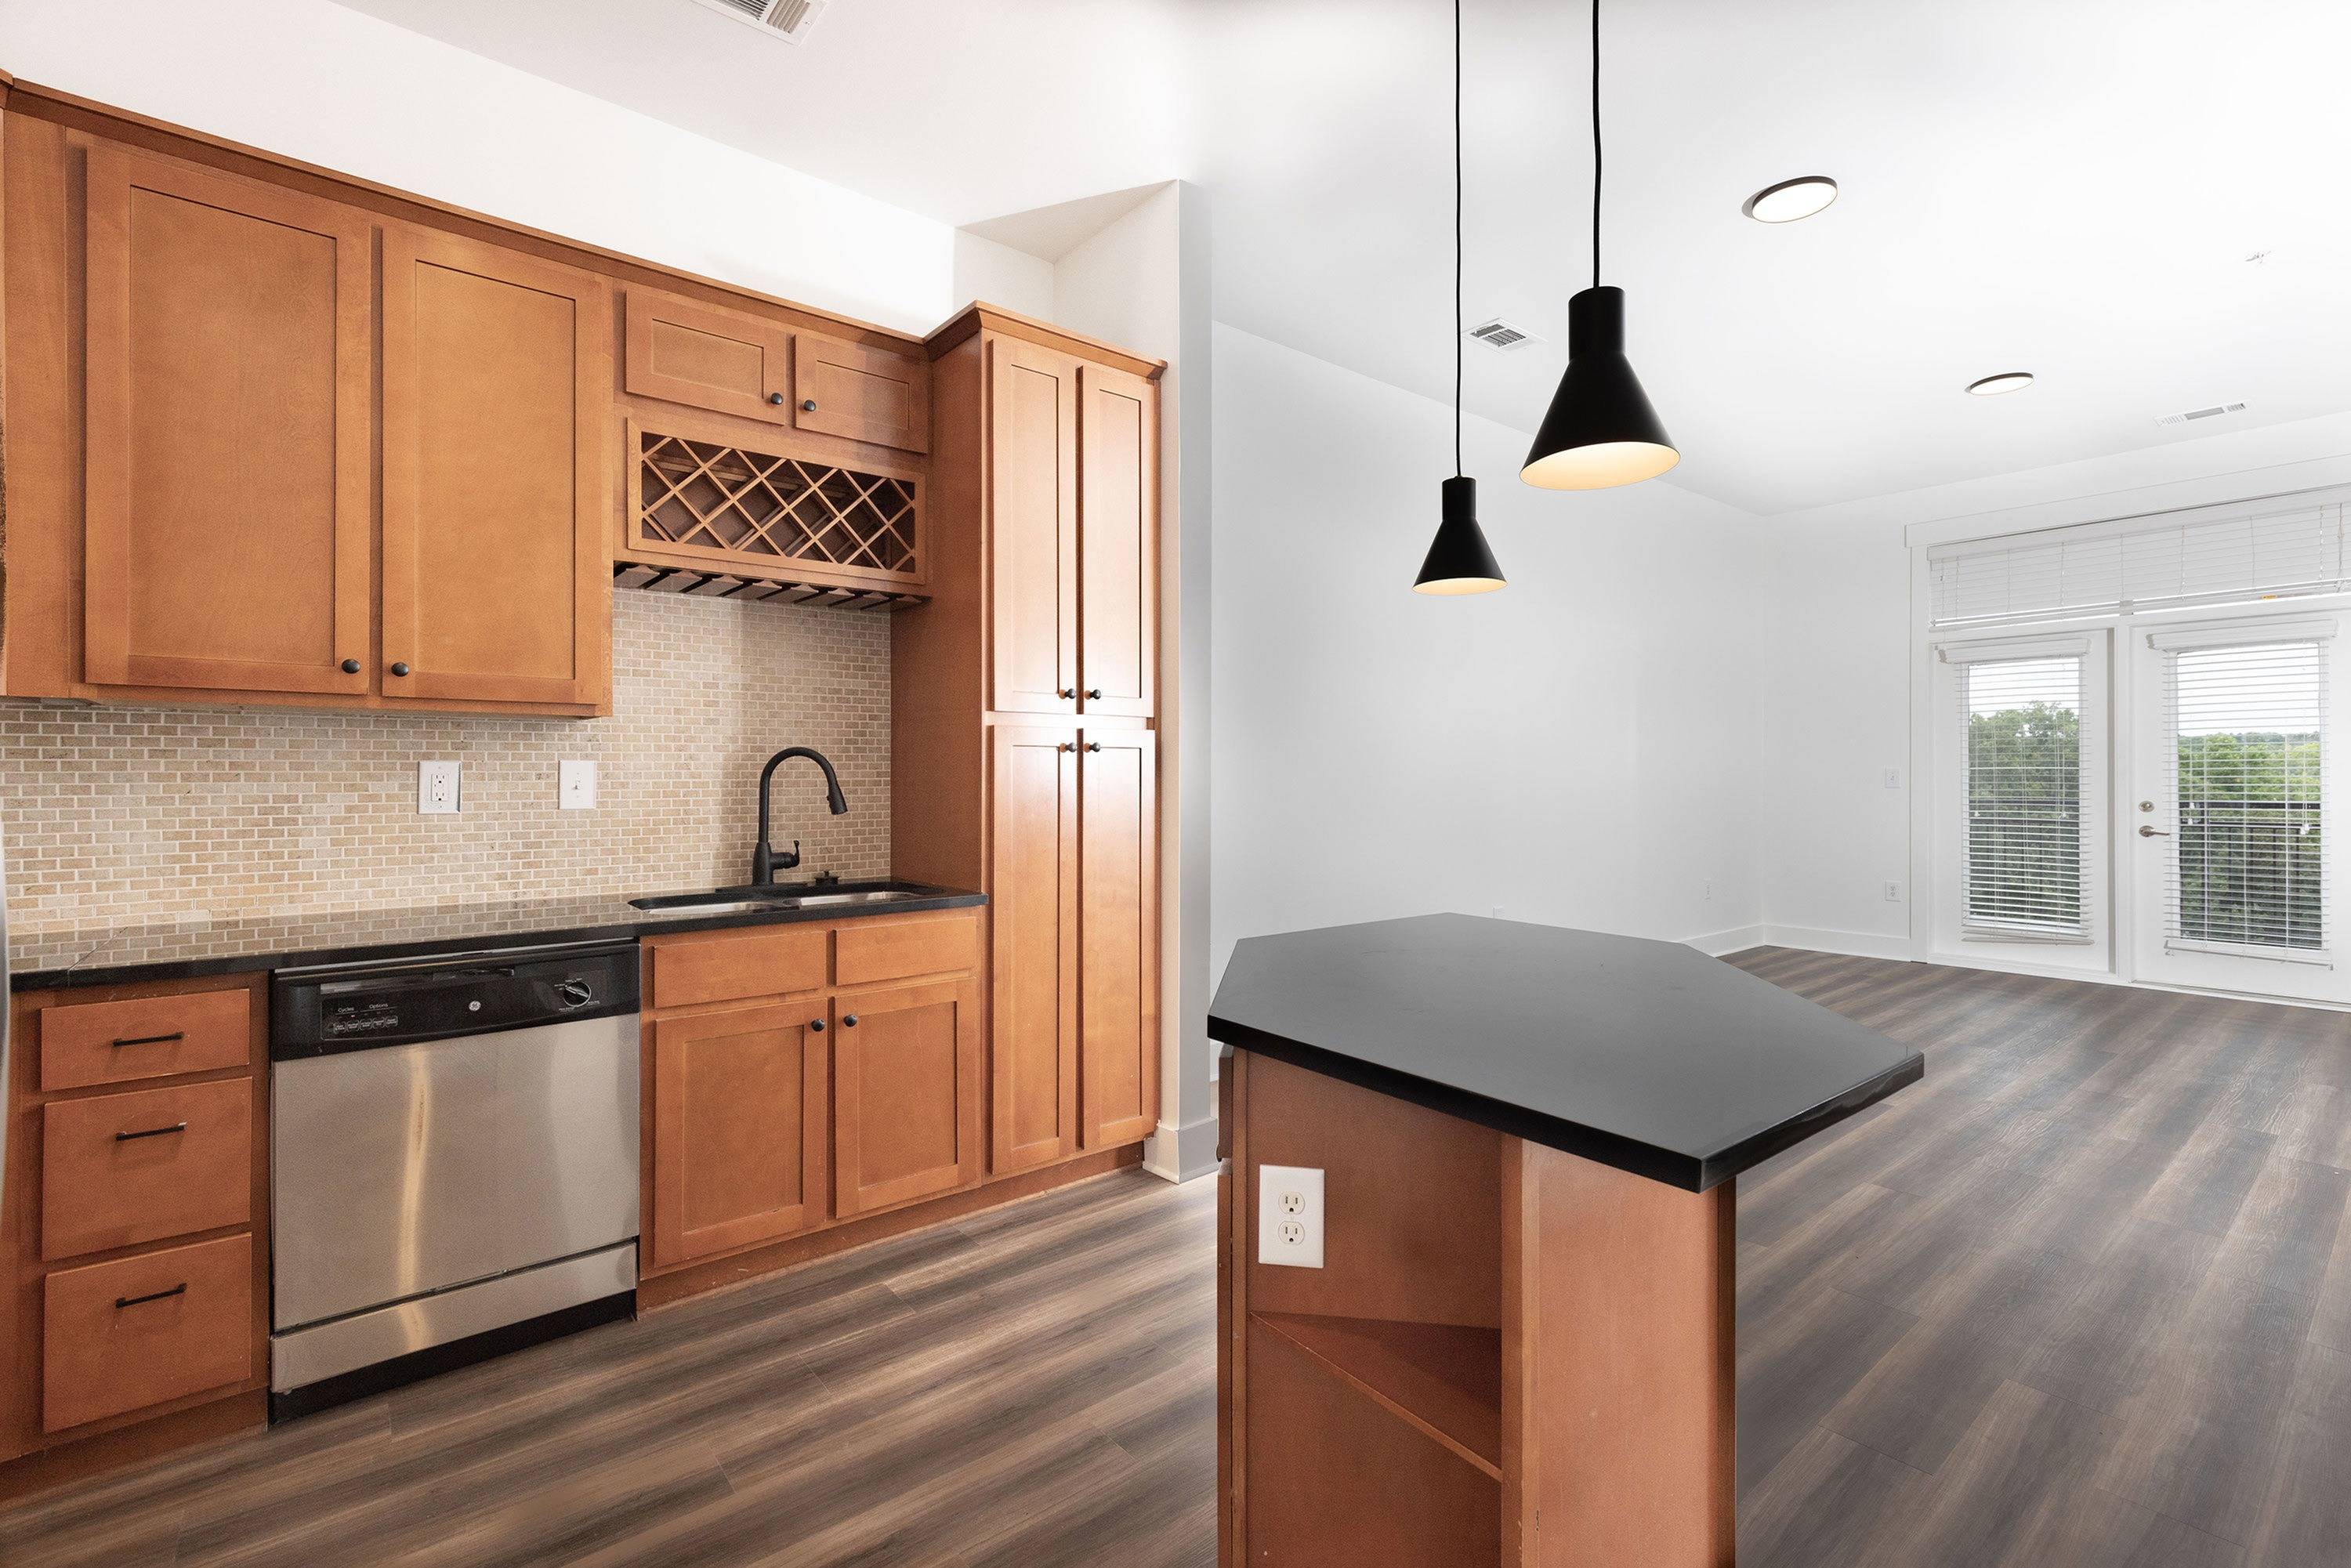 open living space | Apartments in Cary, NC | Lofts at Weston